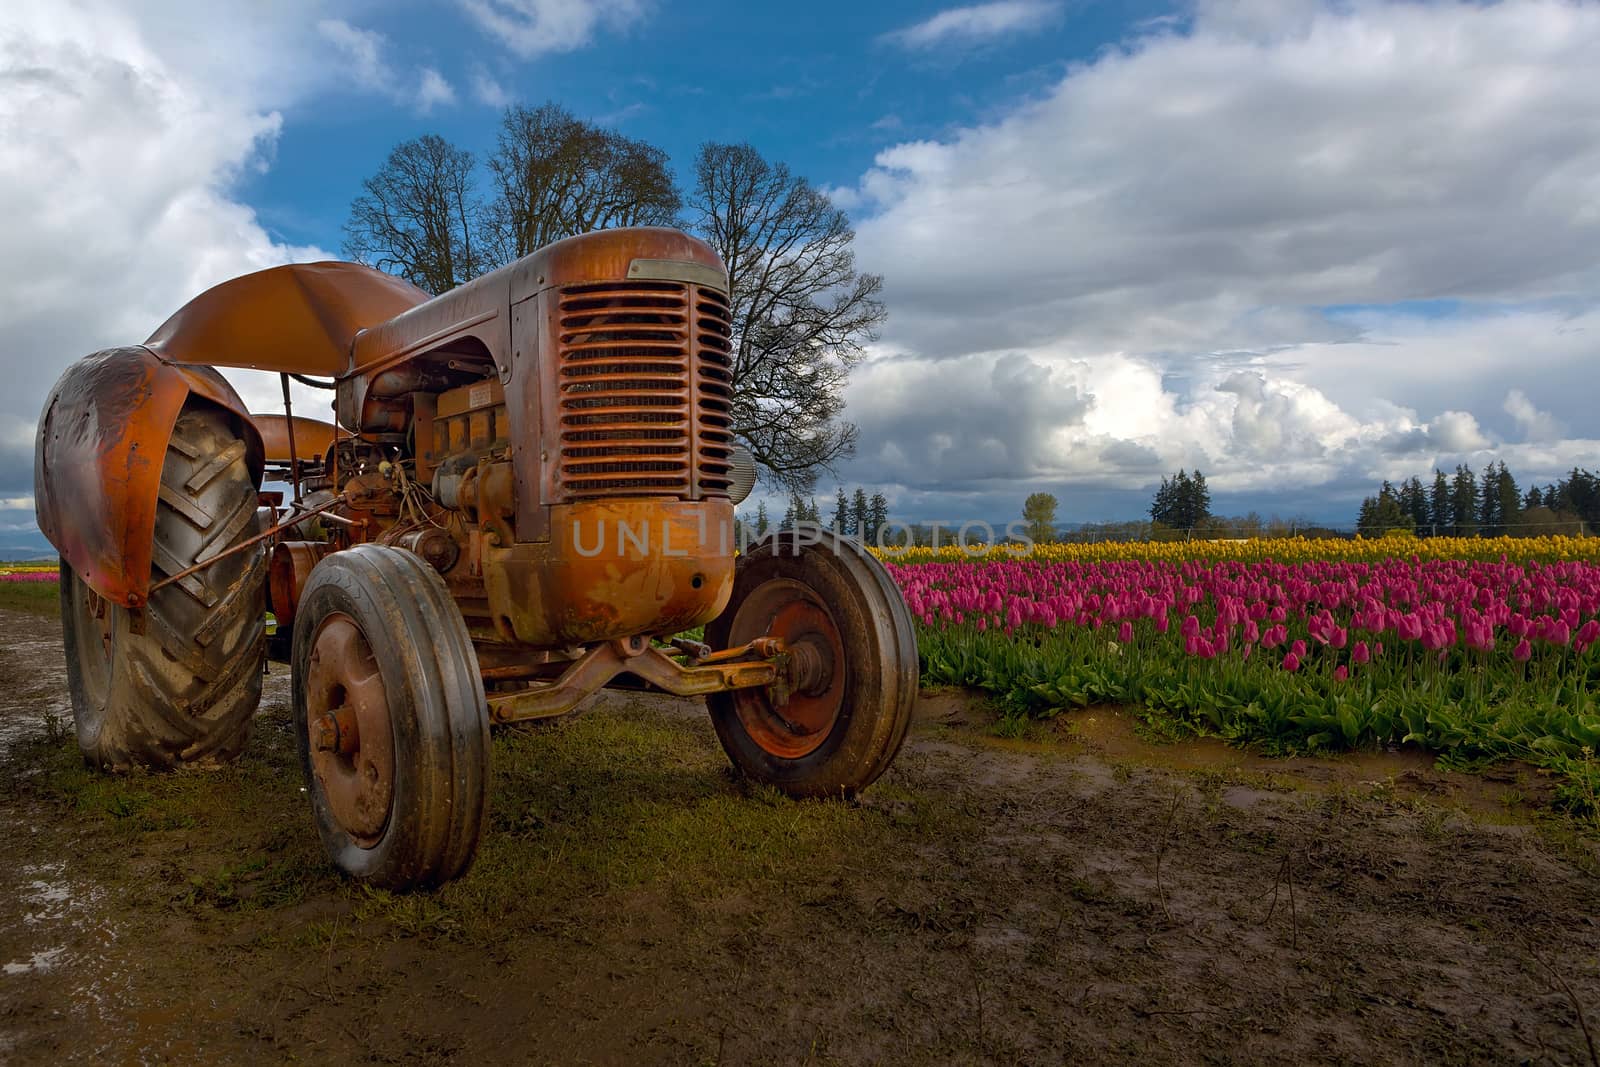 Orange Tractor at Tulip Field by Davidgn